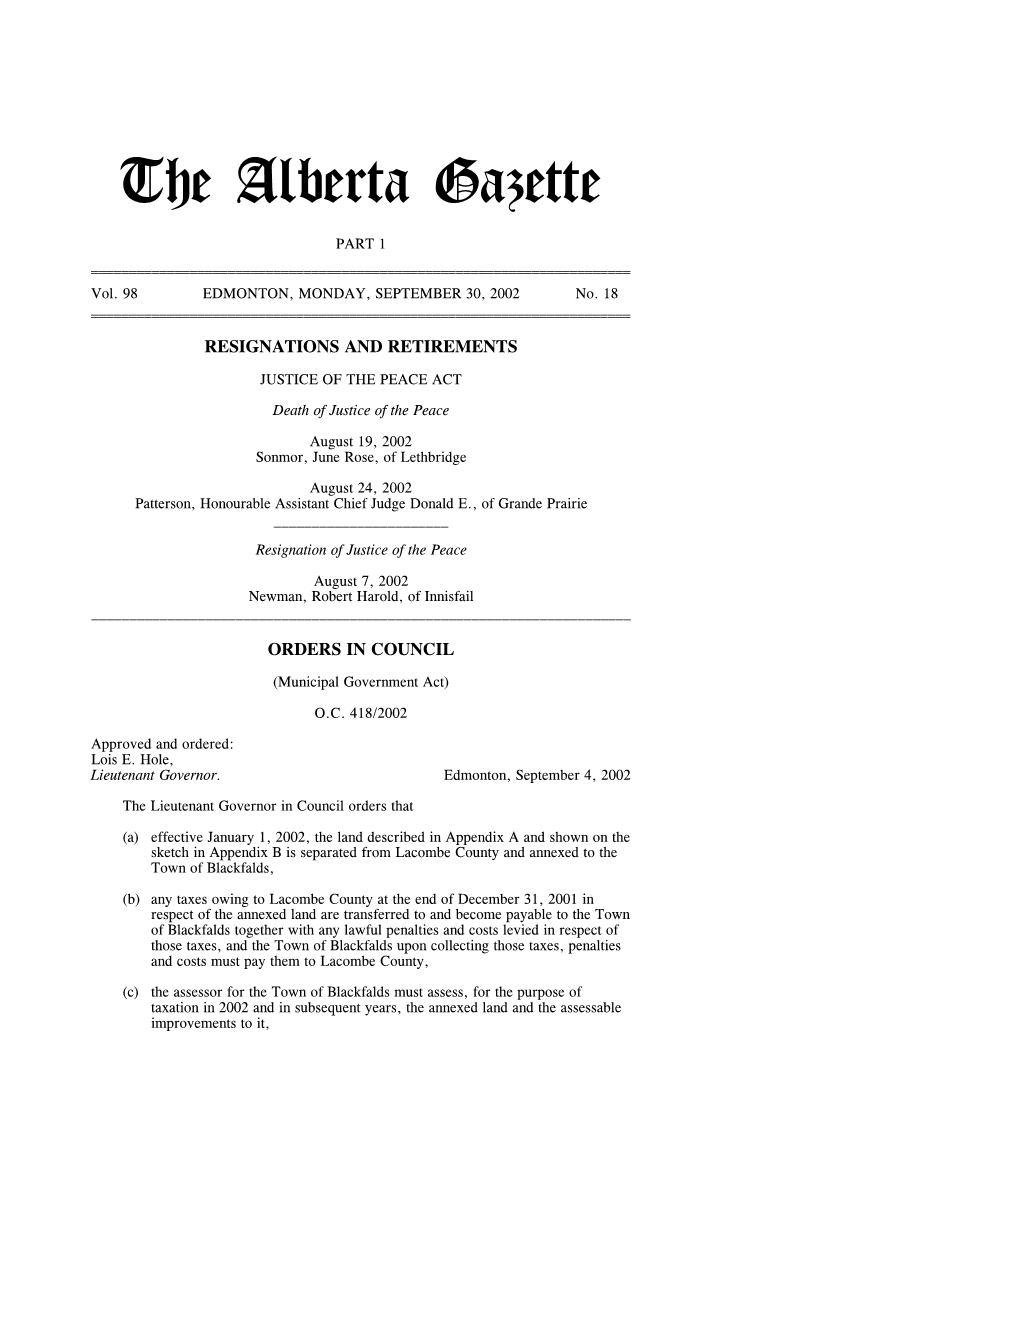 THE ALBERTA GAZETTE, PART I, SEPTEMBER 30, 2002 and Makes the Order in Appendix C